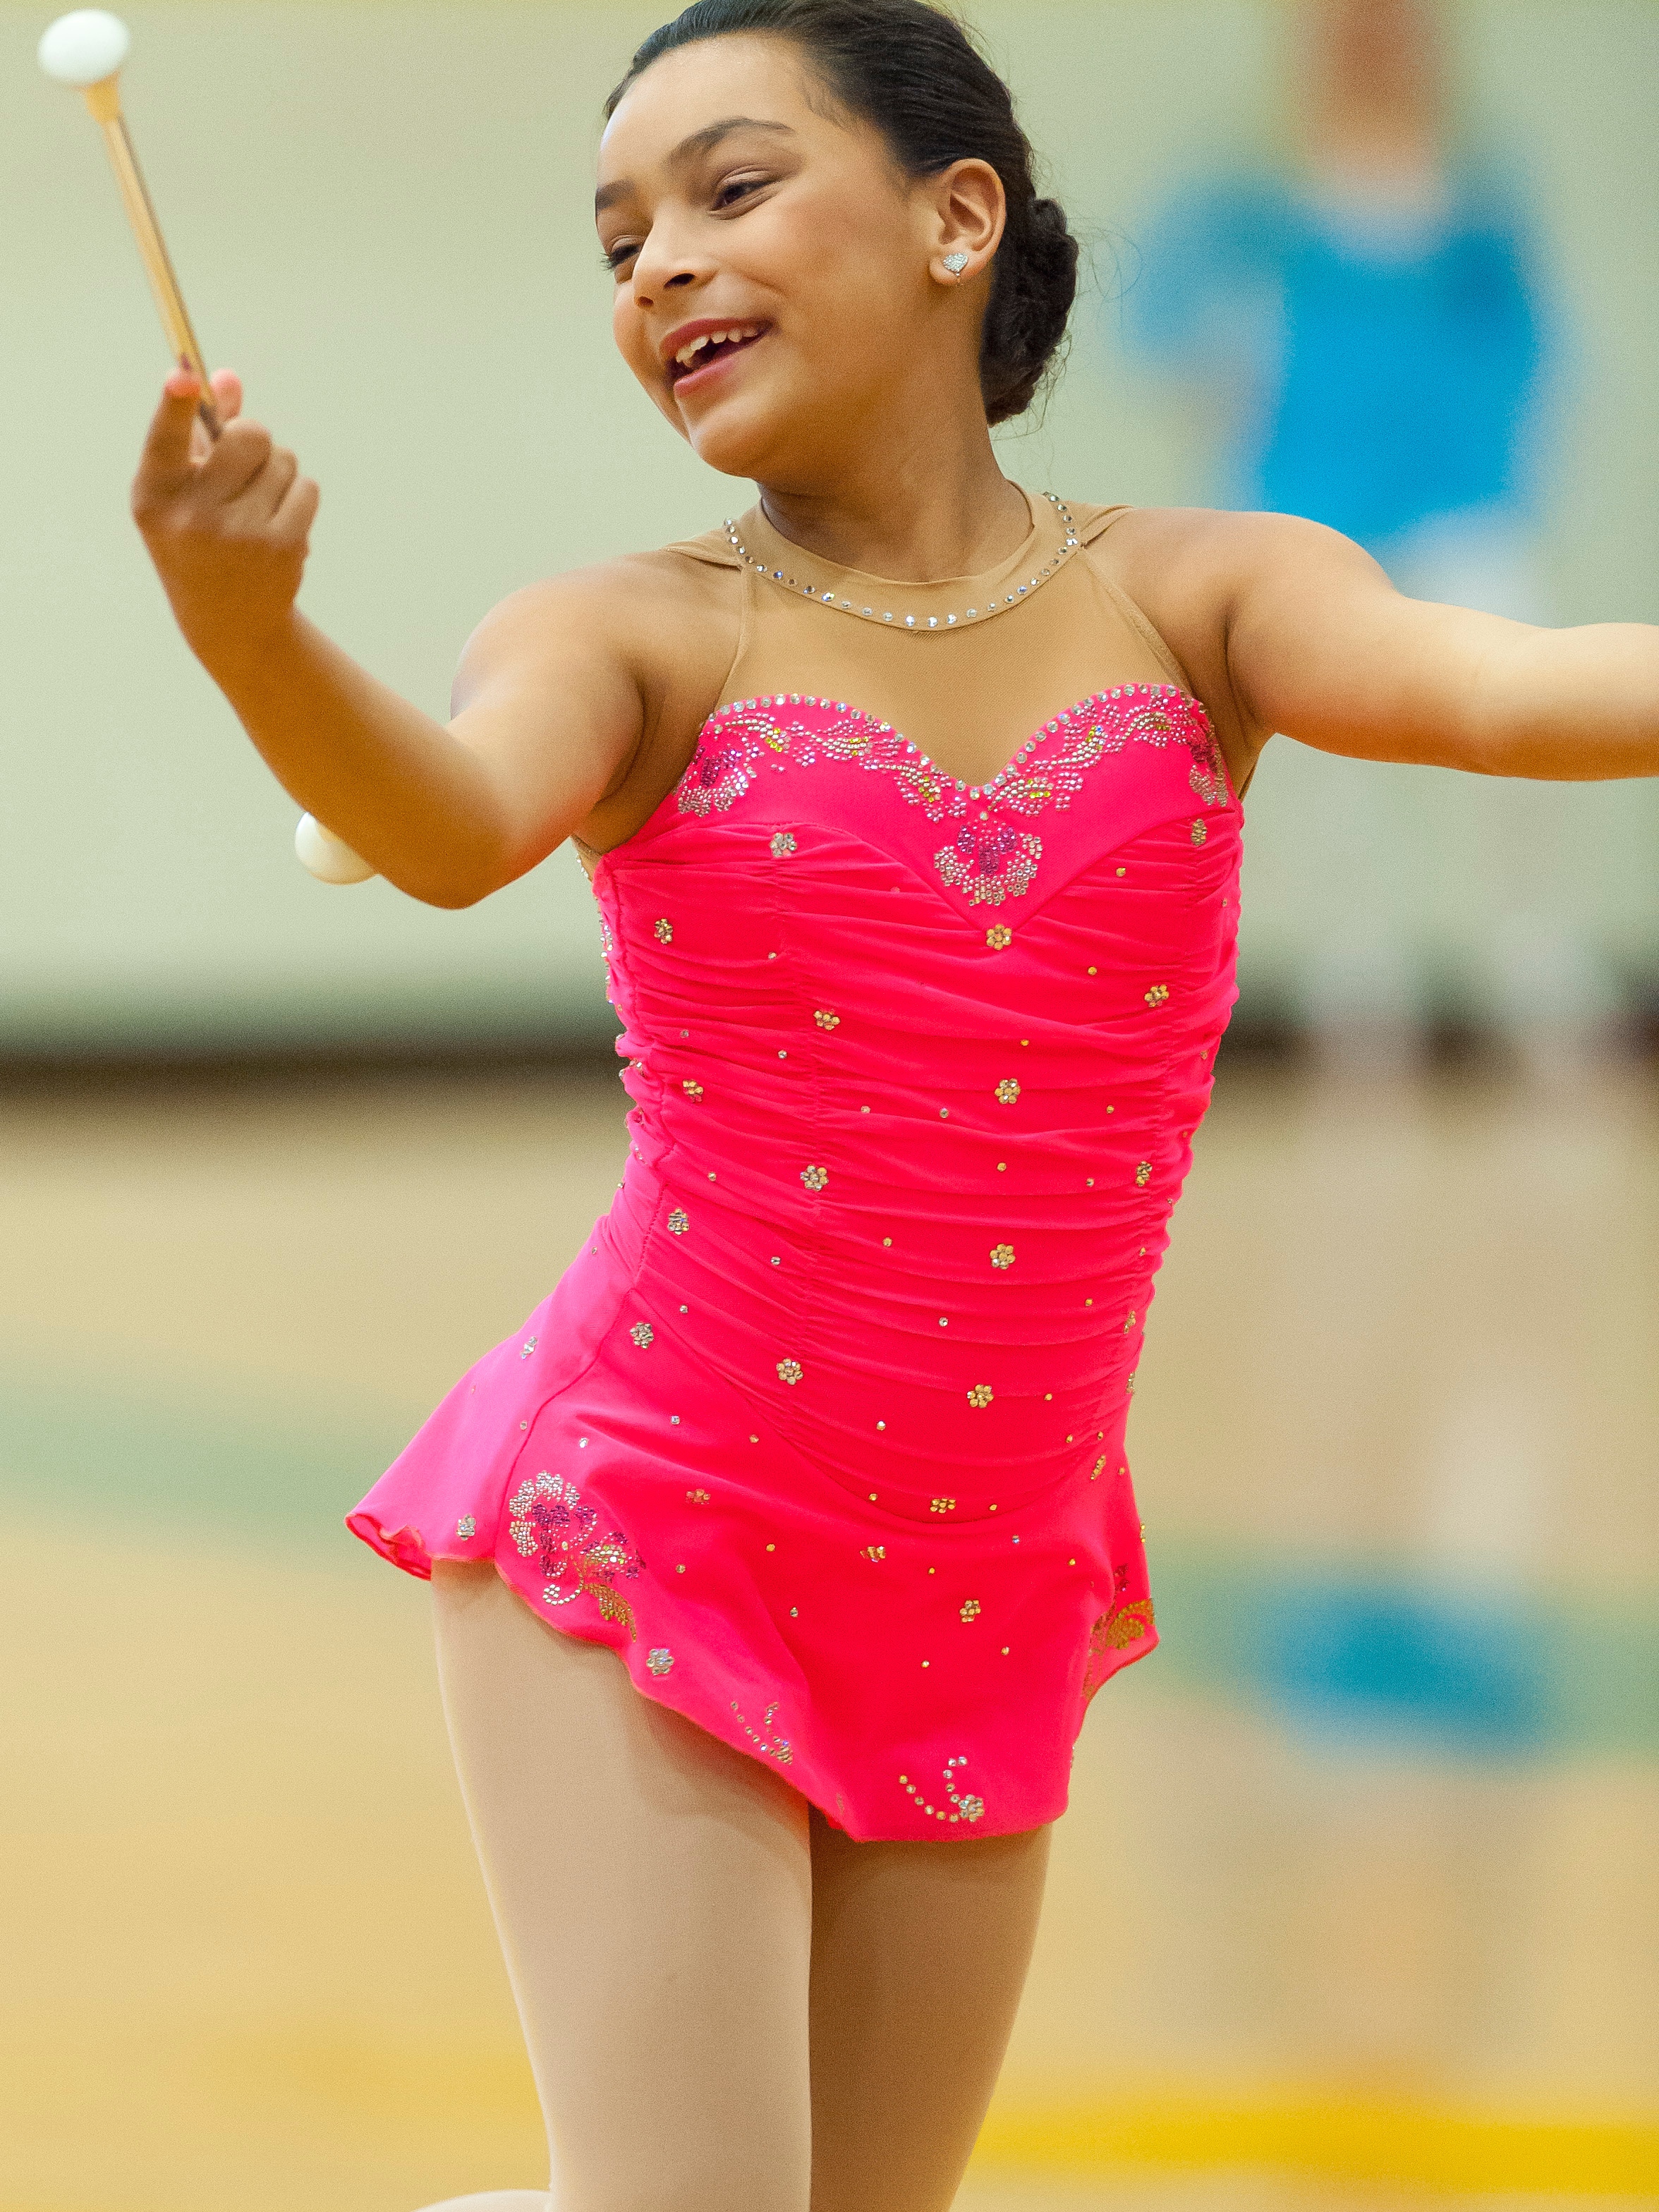 Olivia Pacheco from El Paso, Texas performs her Strut at the 2014 Texas State Twirling Championships held in DeSoto, Texas